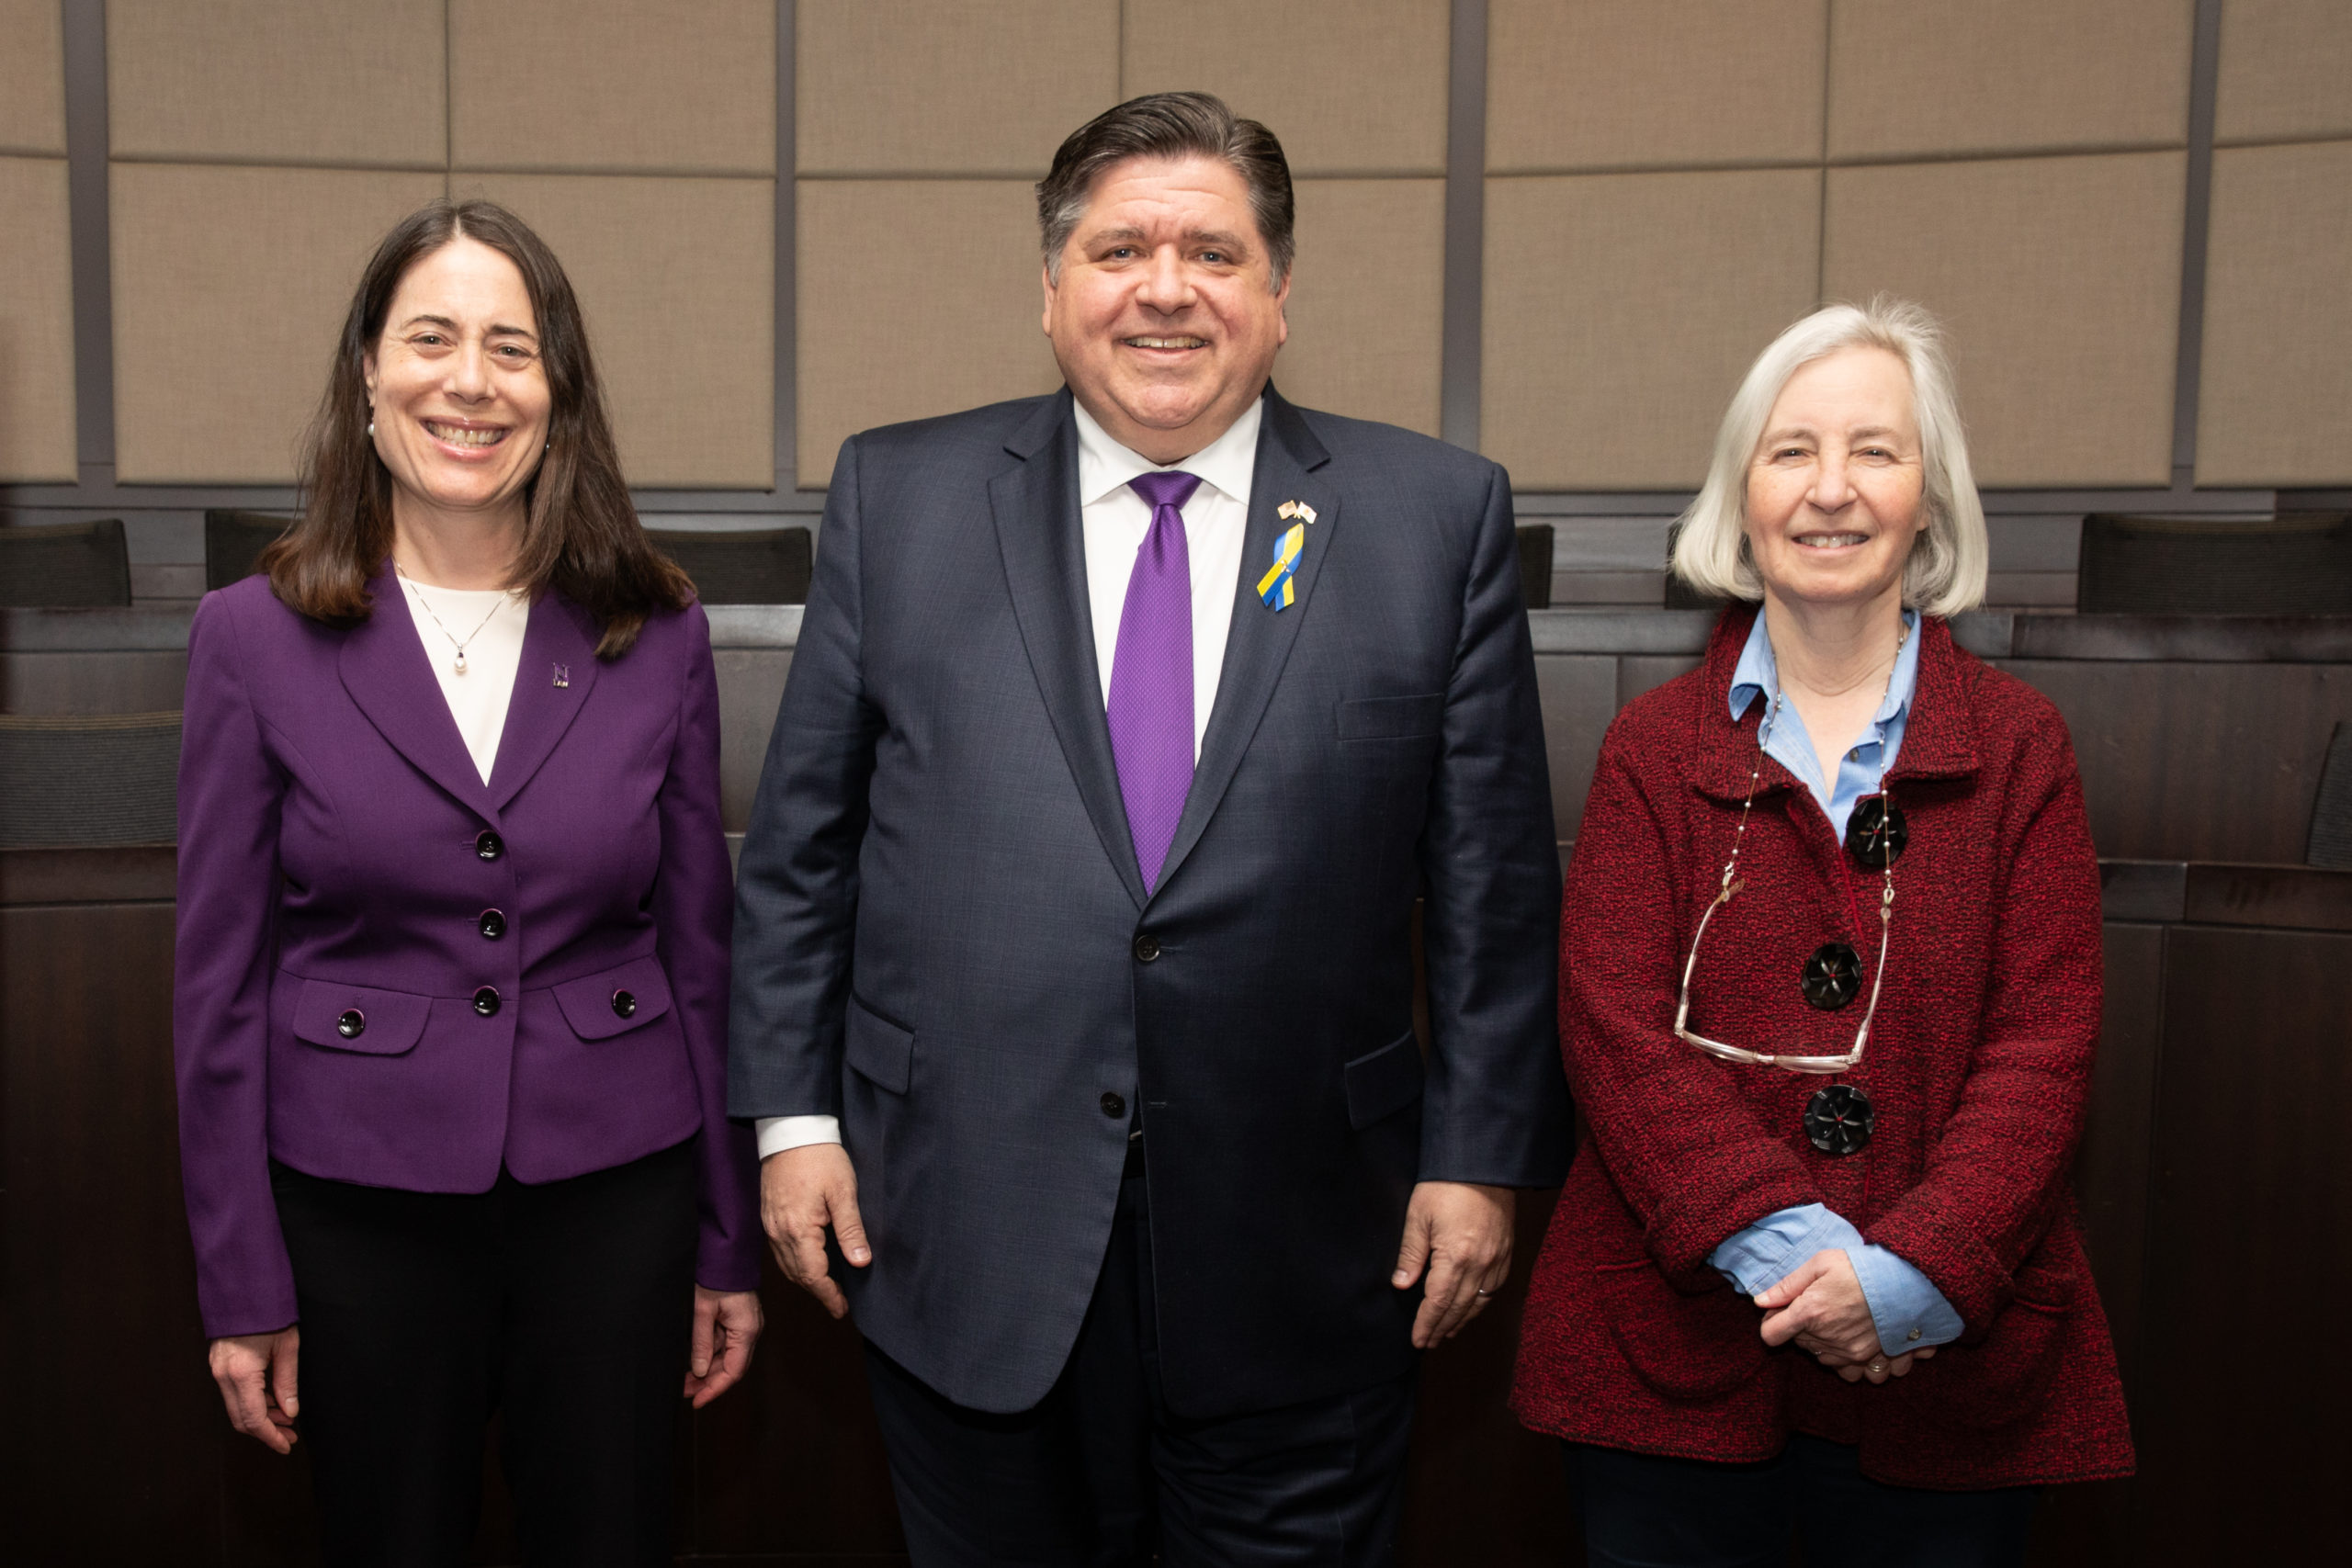 Dean Hari Osofsky, Illinois Governor J.B. Pritzker, and former dean of Harvard Law School Martha Minow at the Legal Services Corporation's 50th Anniversary Symposium